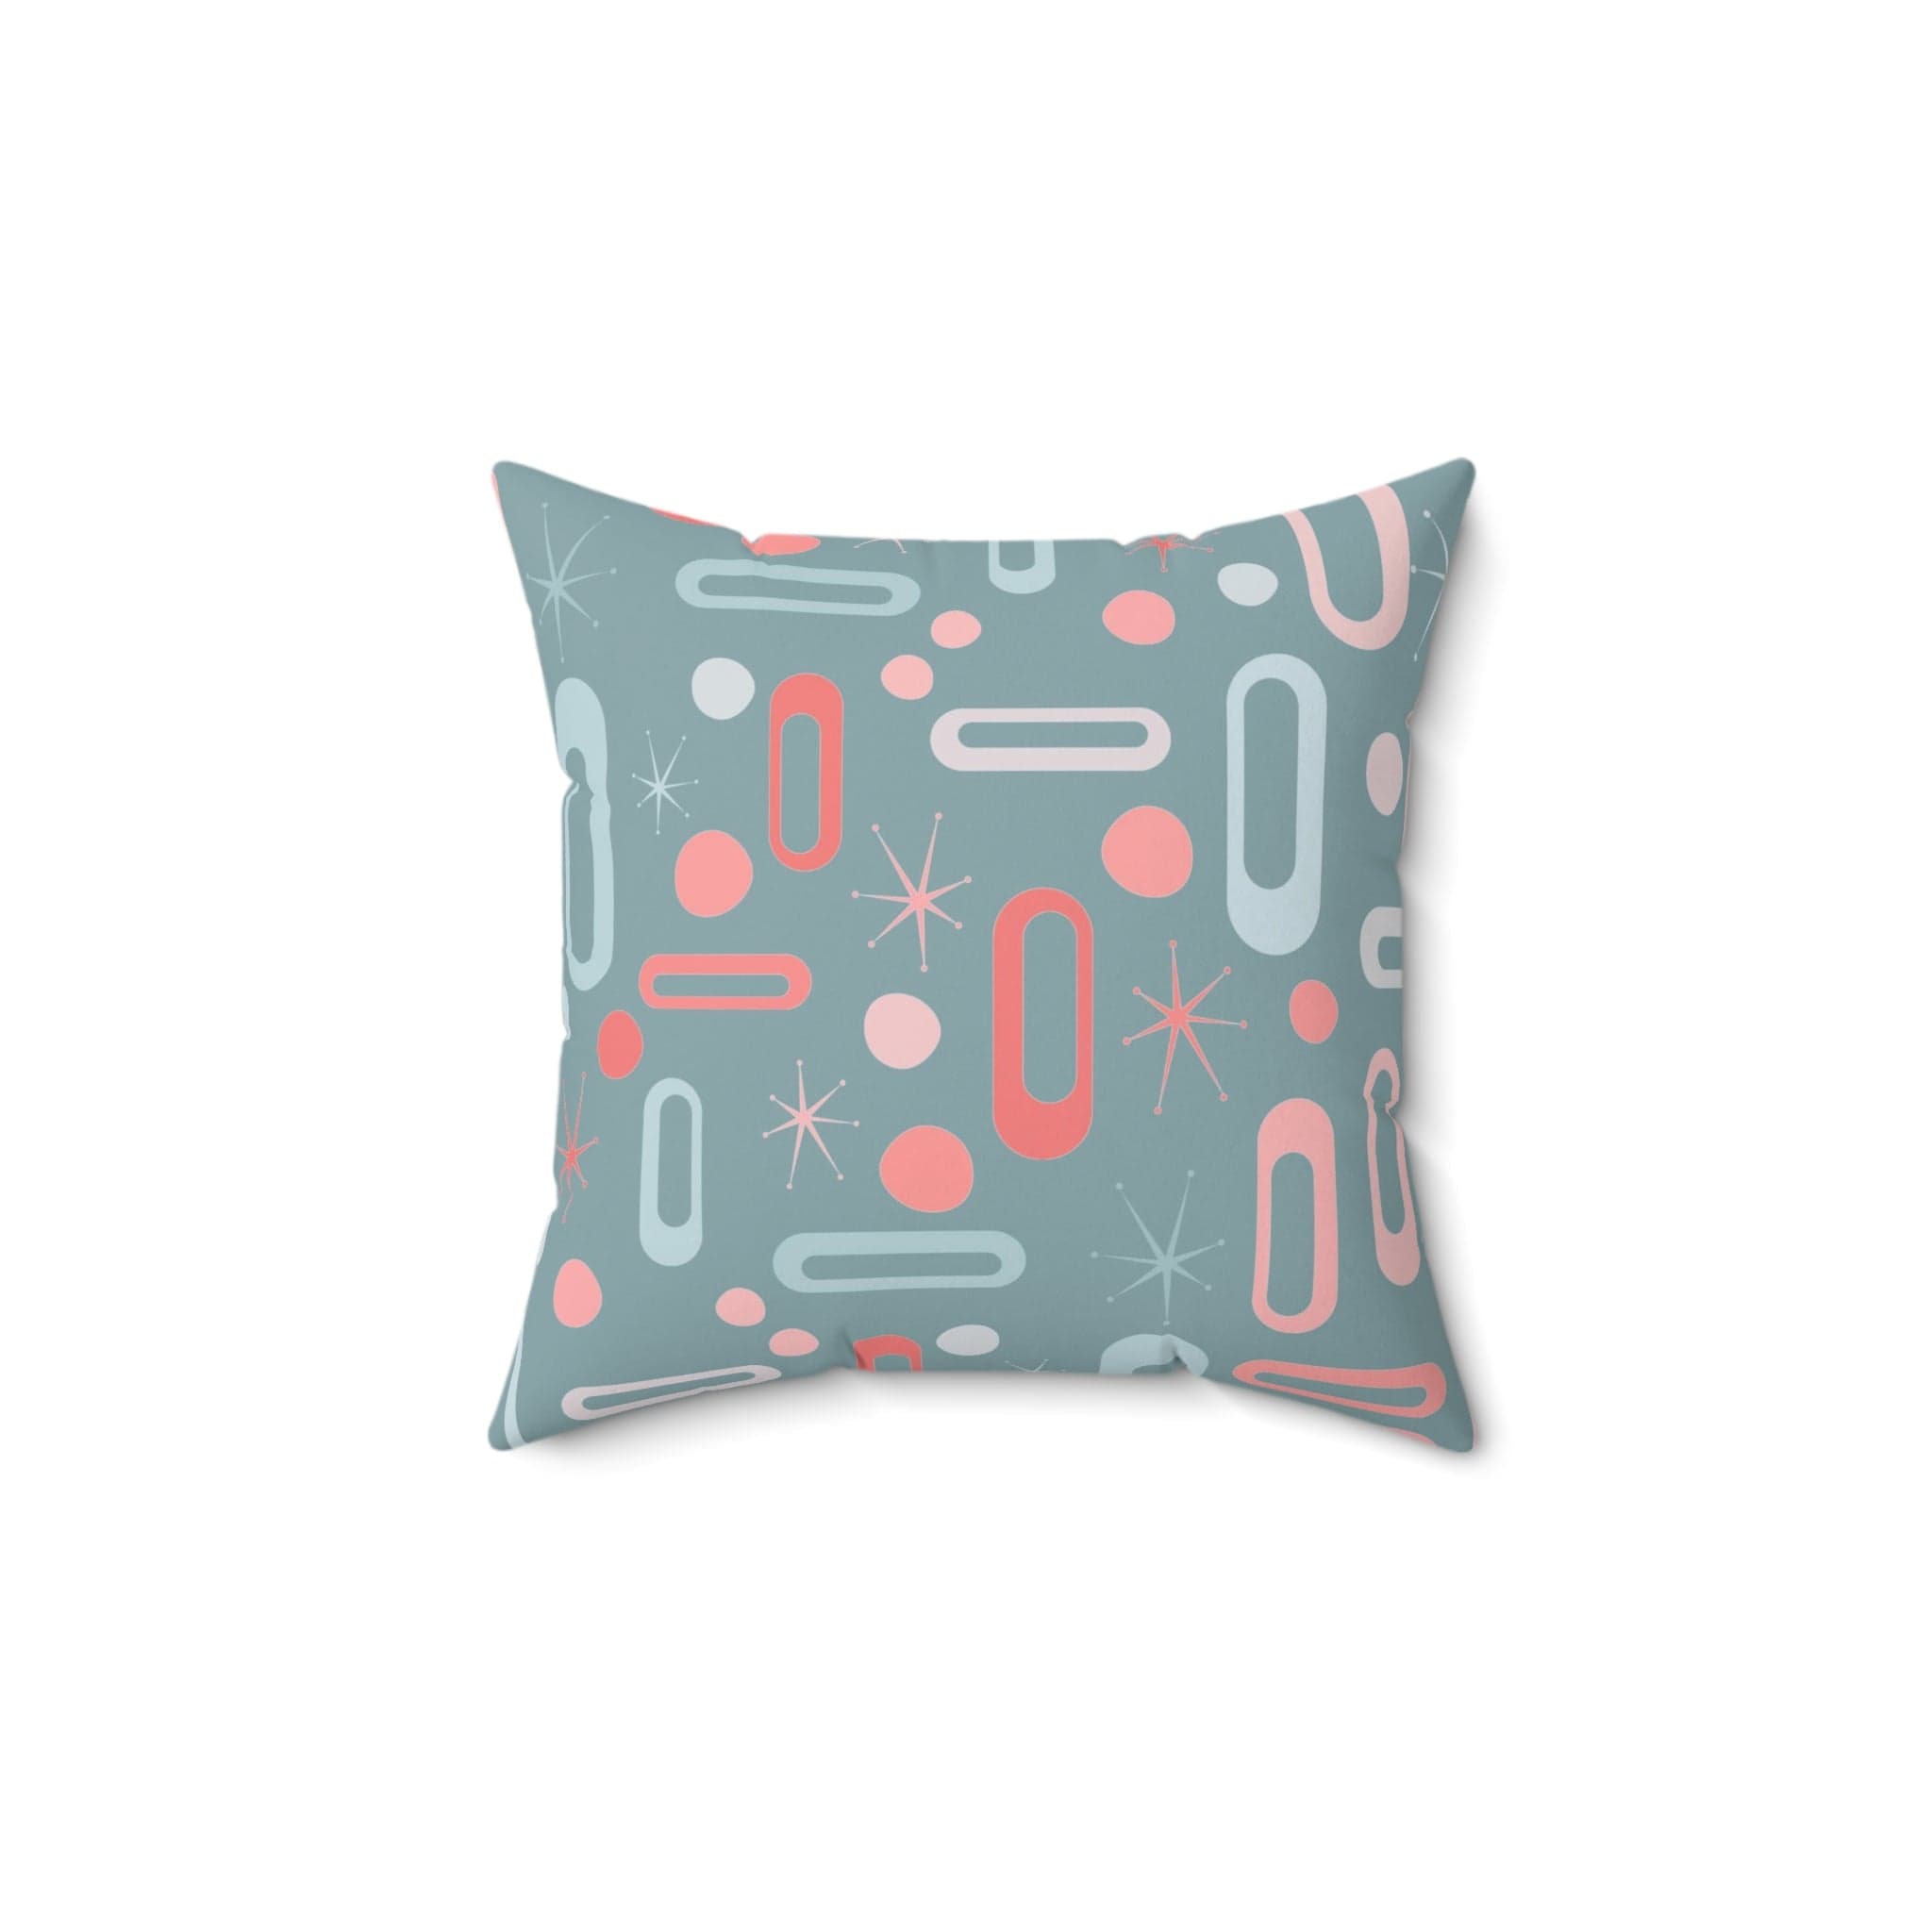 Mid Century Modern Pillow, Ice Blue, Pink, Coral, Geometric Designs, Atomic Starburst MCM Retro Home Decor Pillow And Insert Home Decor